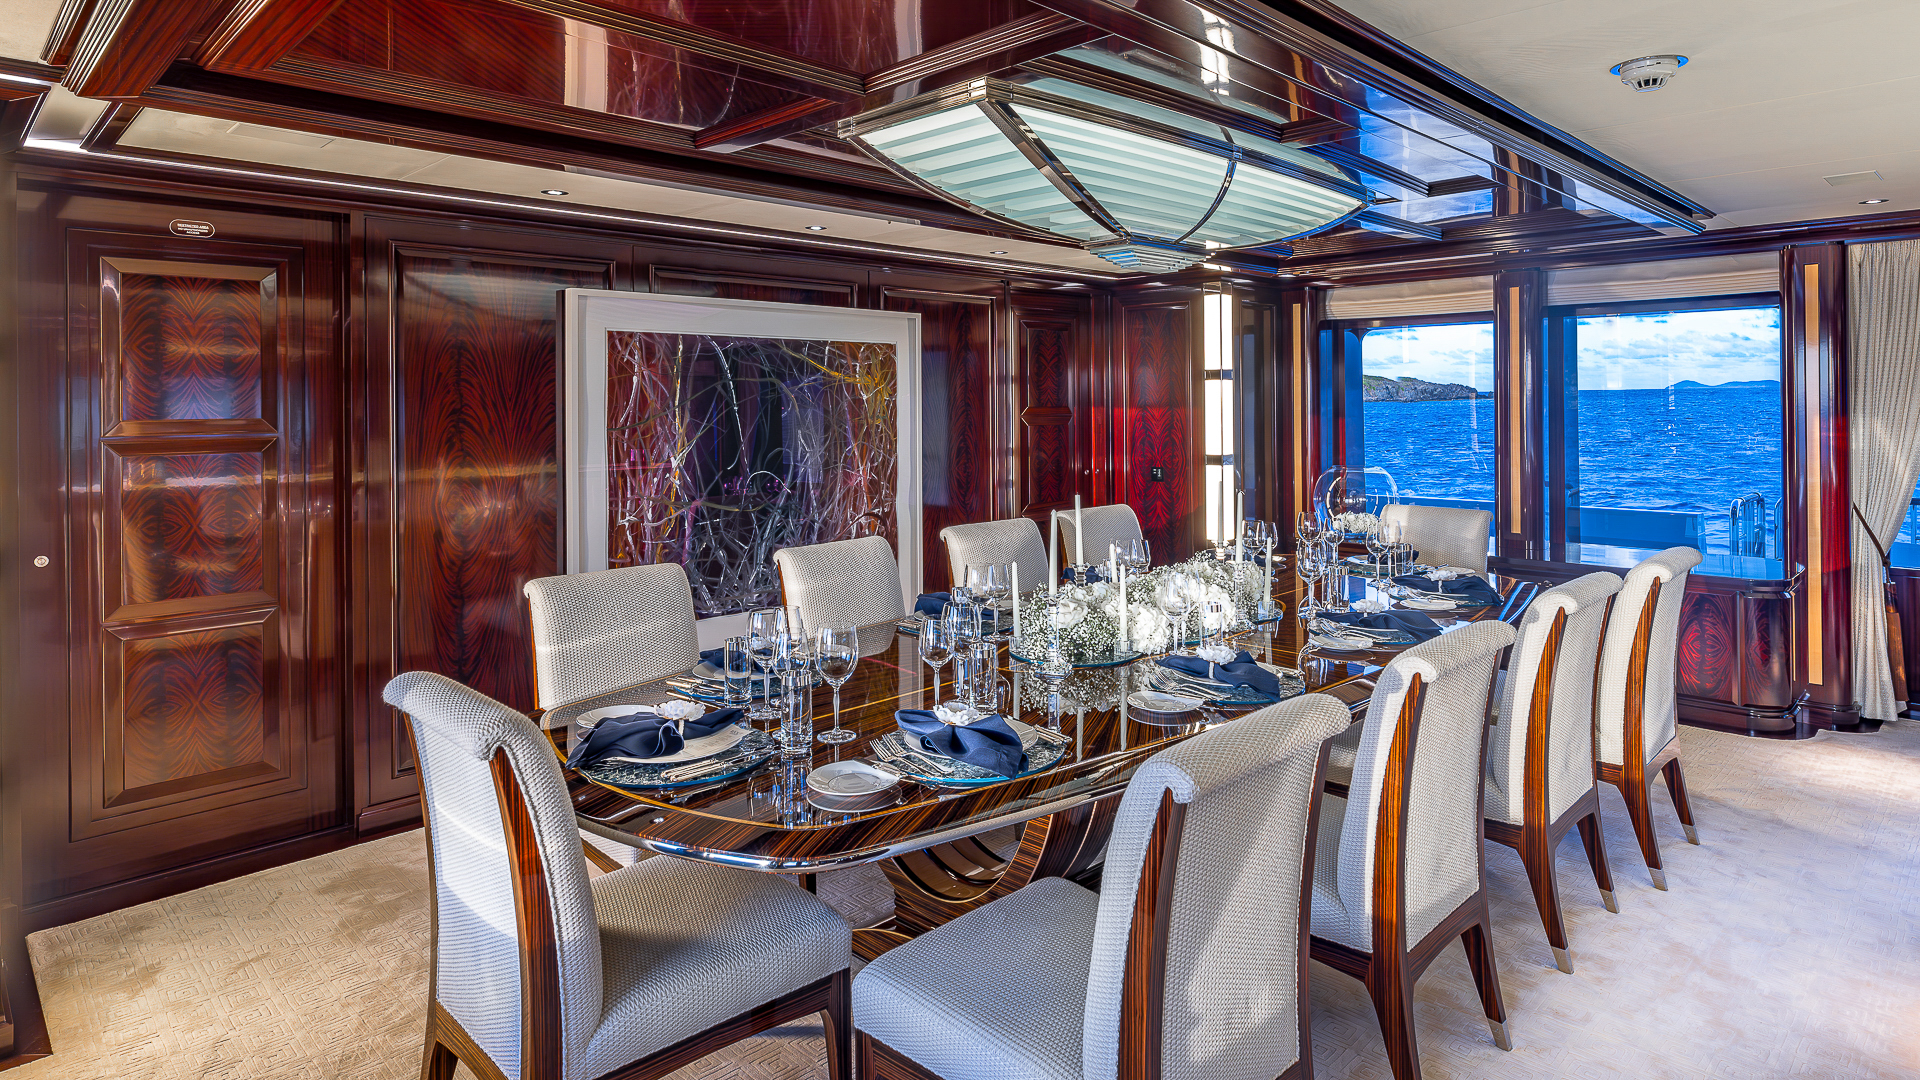 Rock It Main Saloon Formal Dining Area Credit Yachting Image